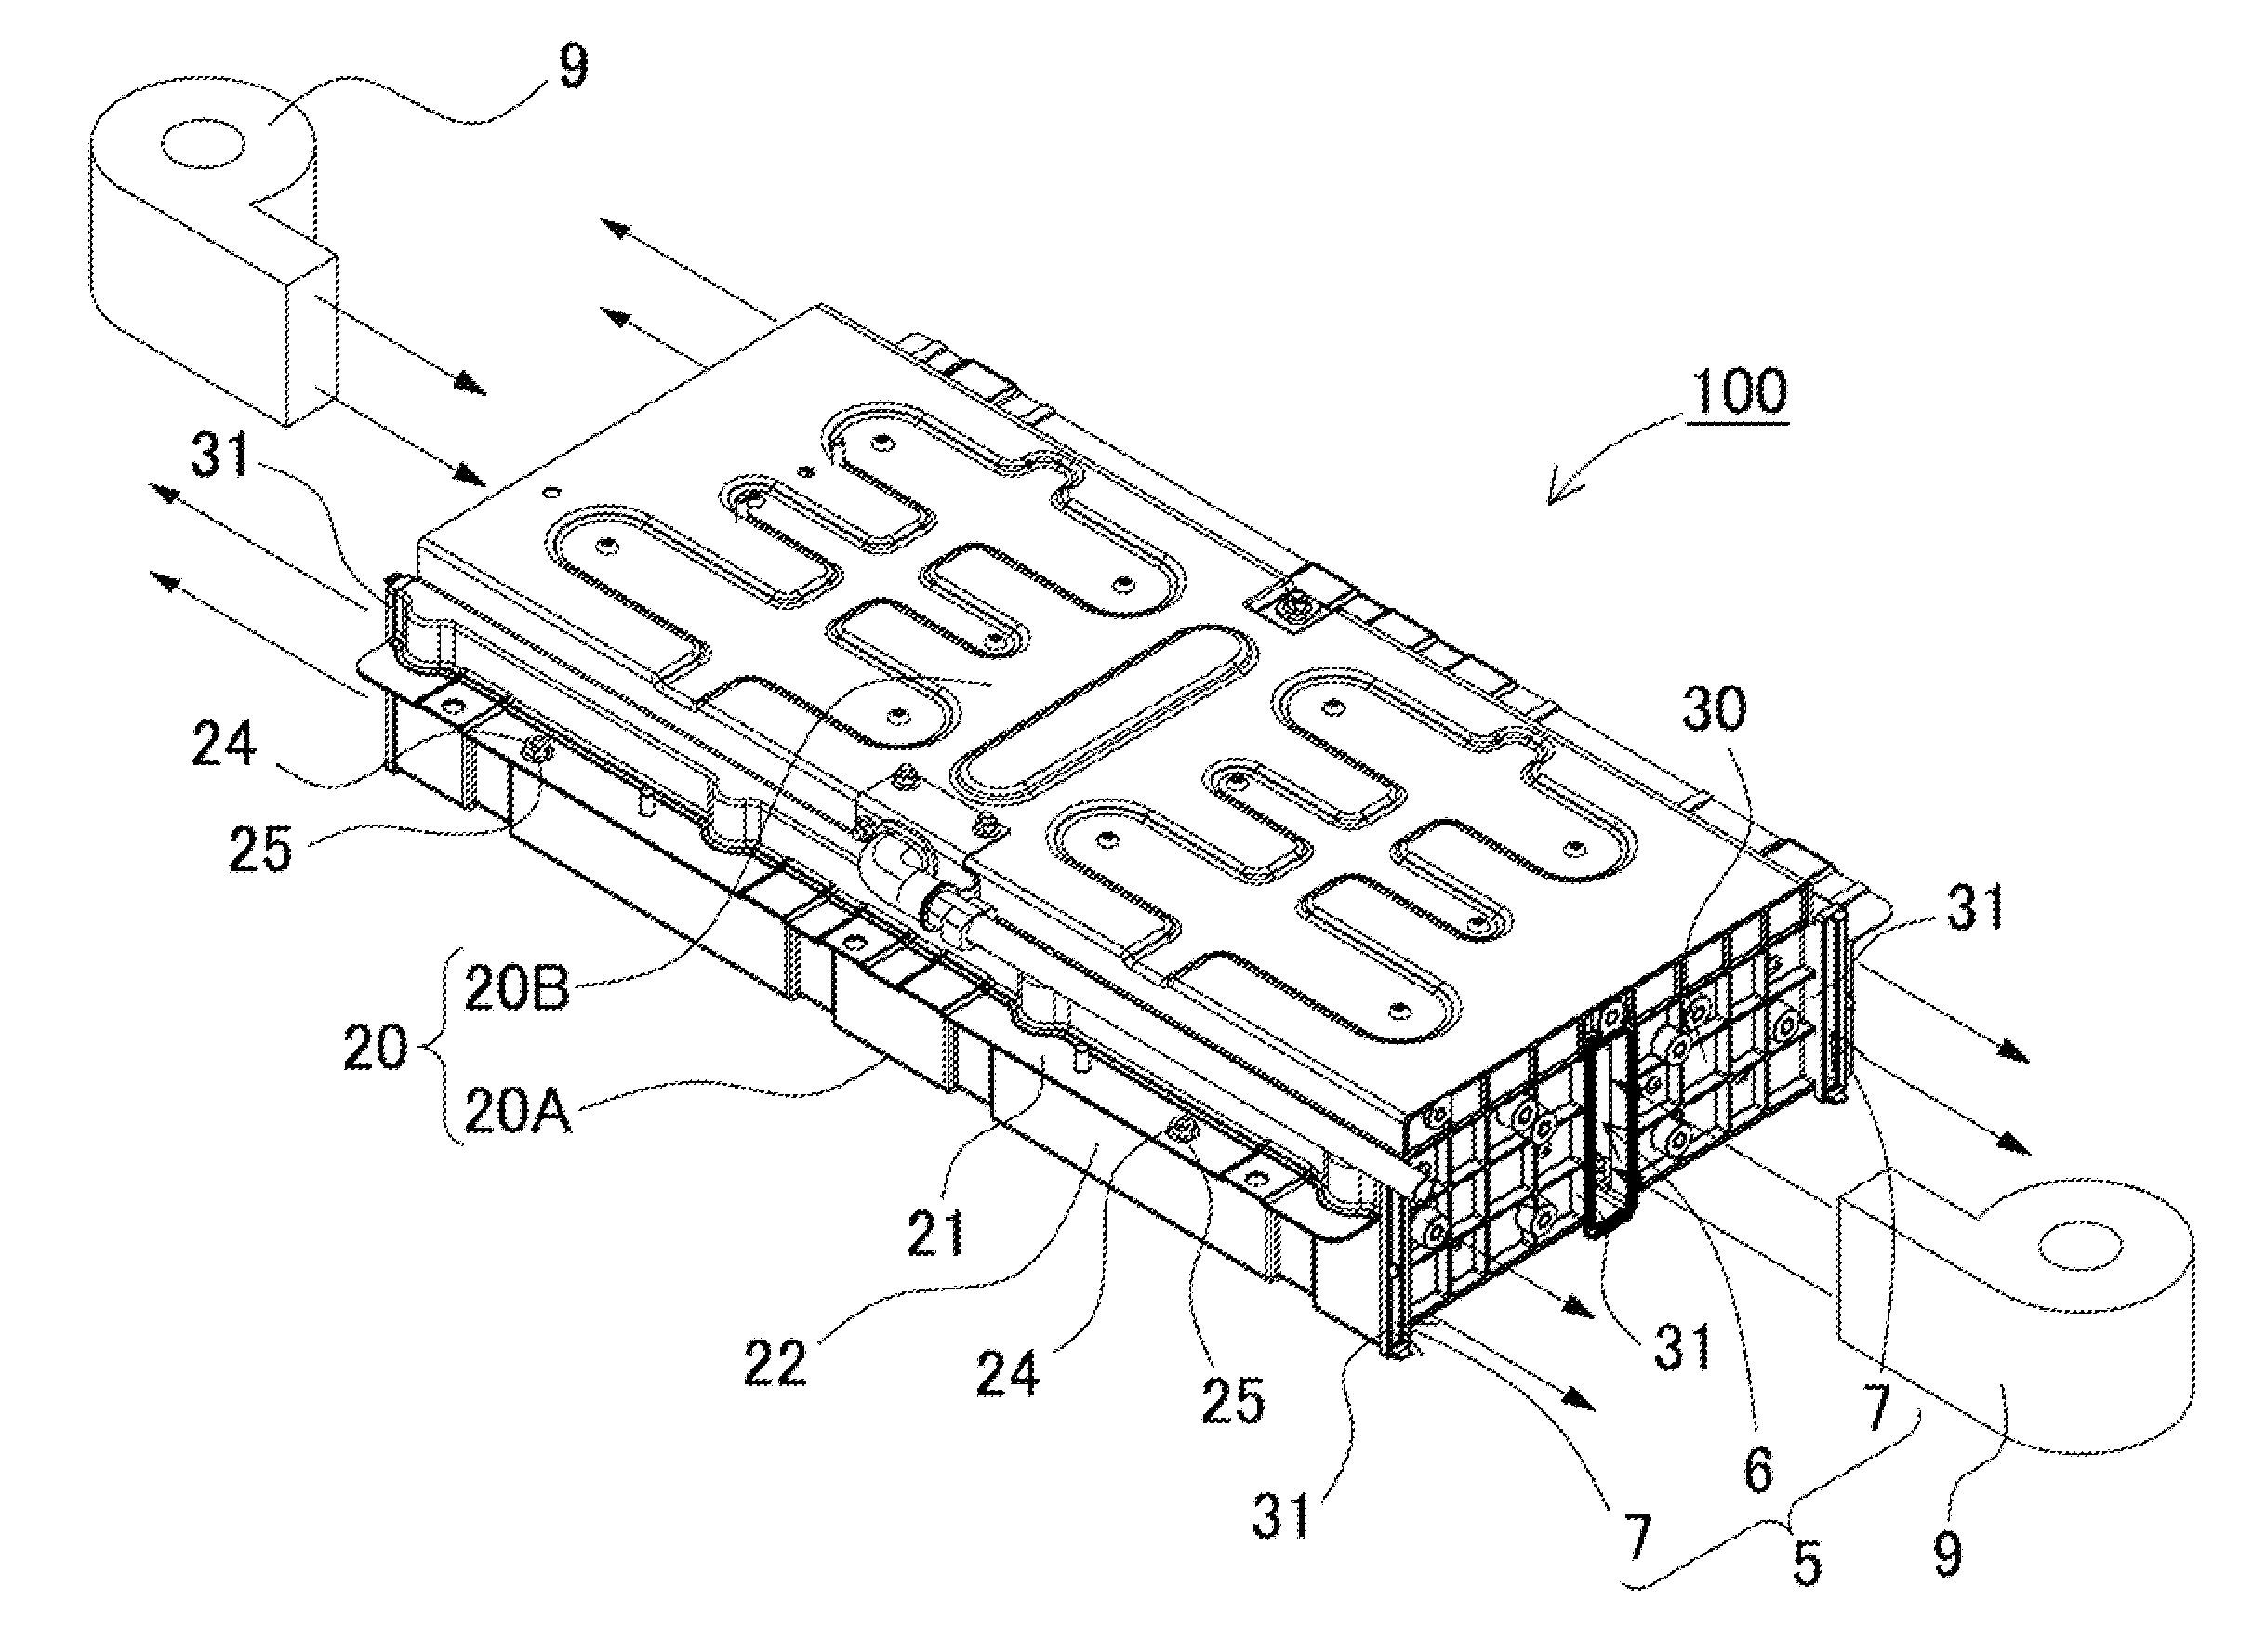 Power supply device including a plurality of battery cells arranged side by side